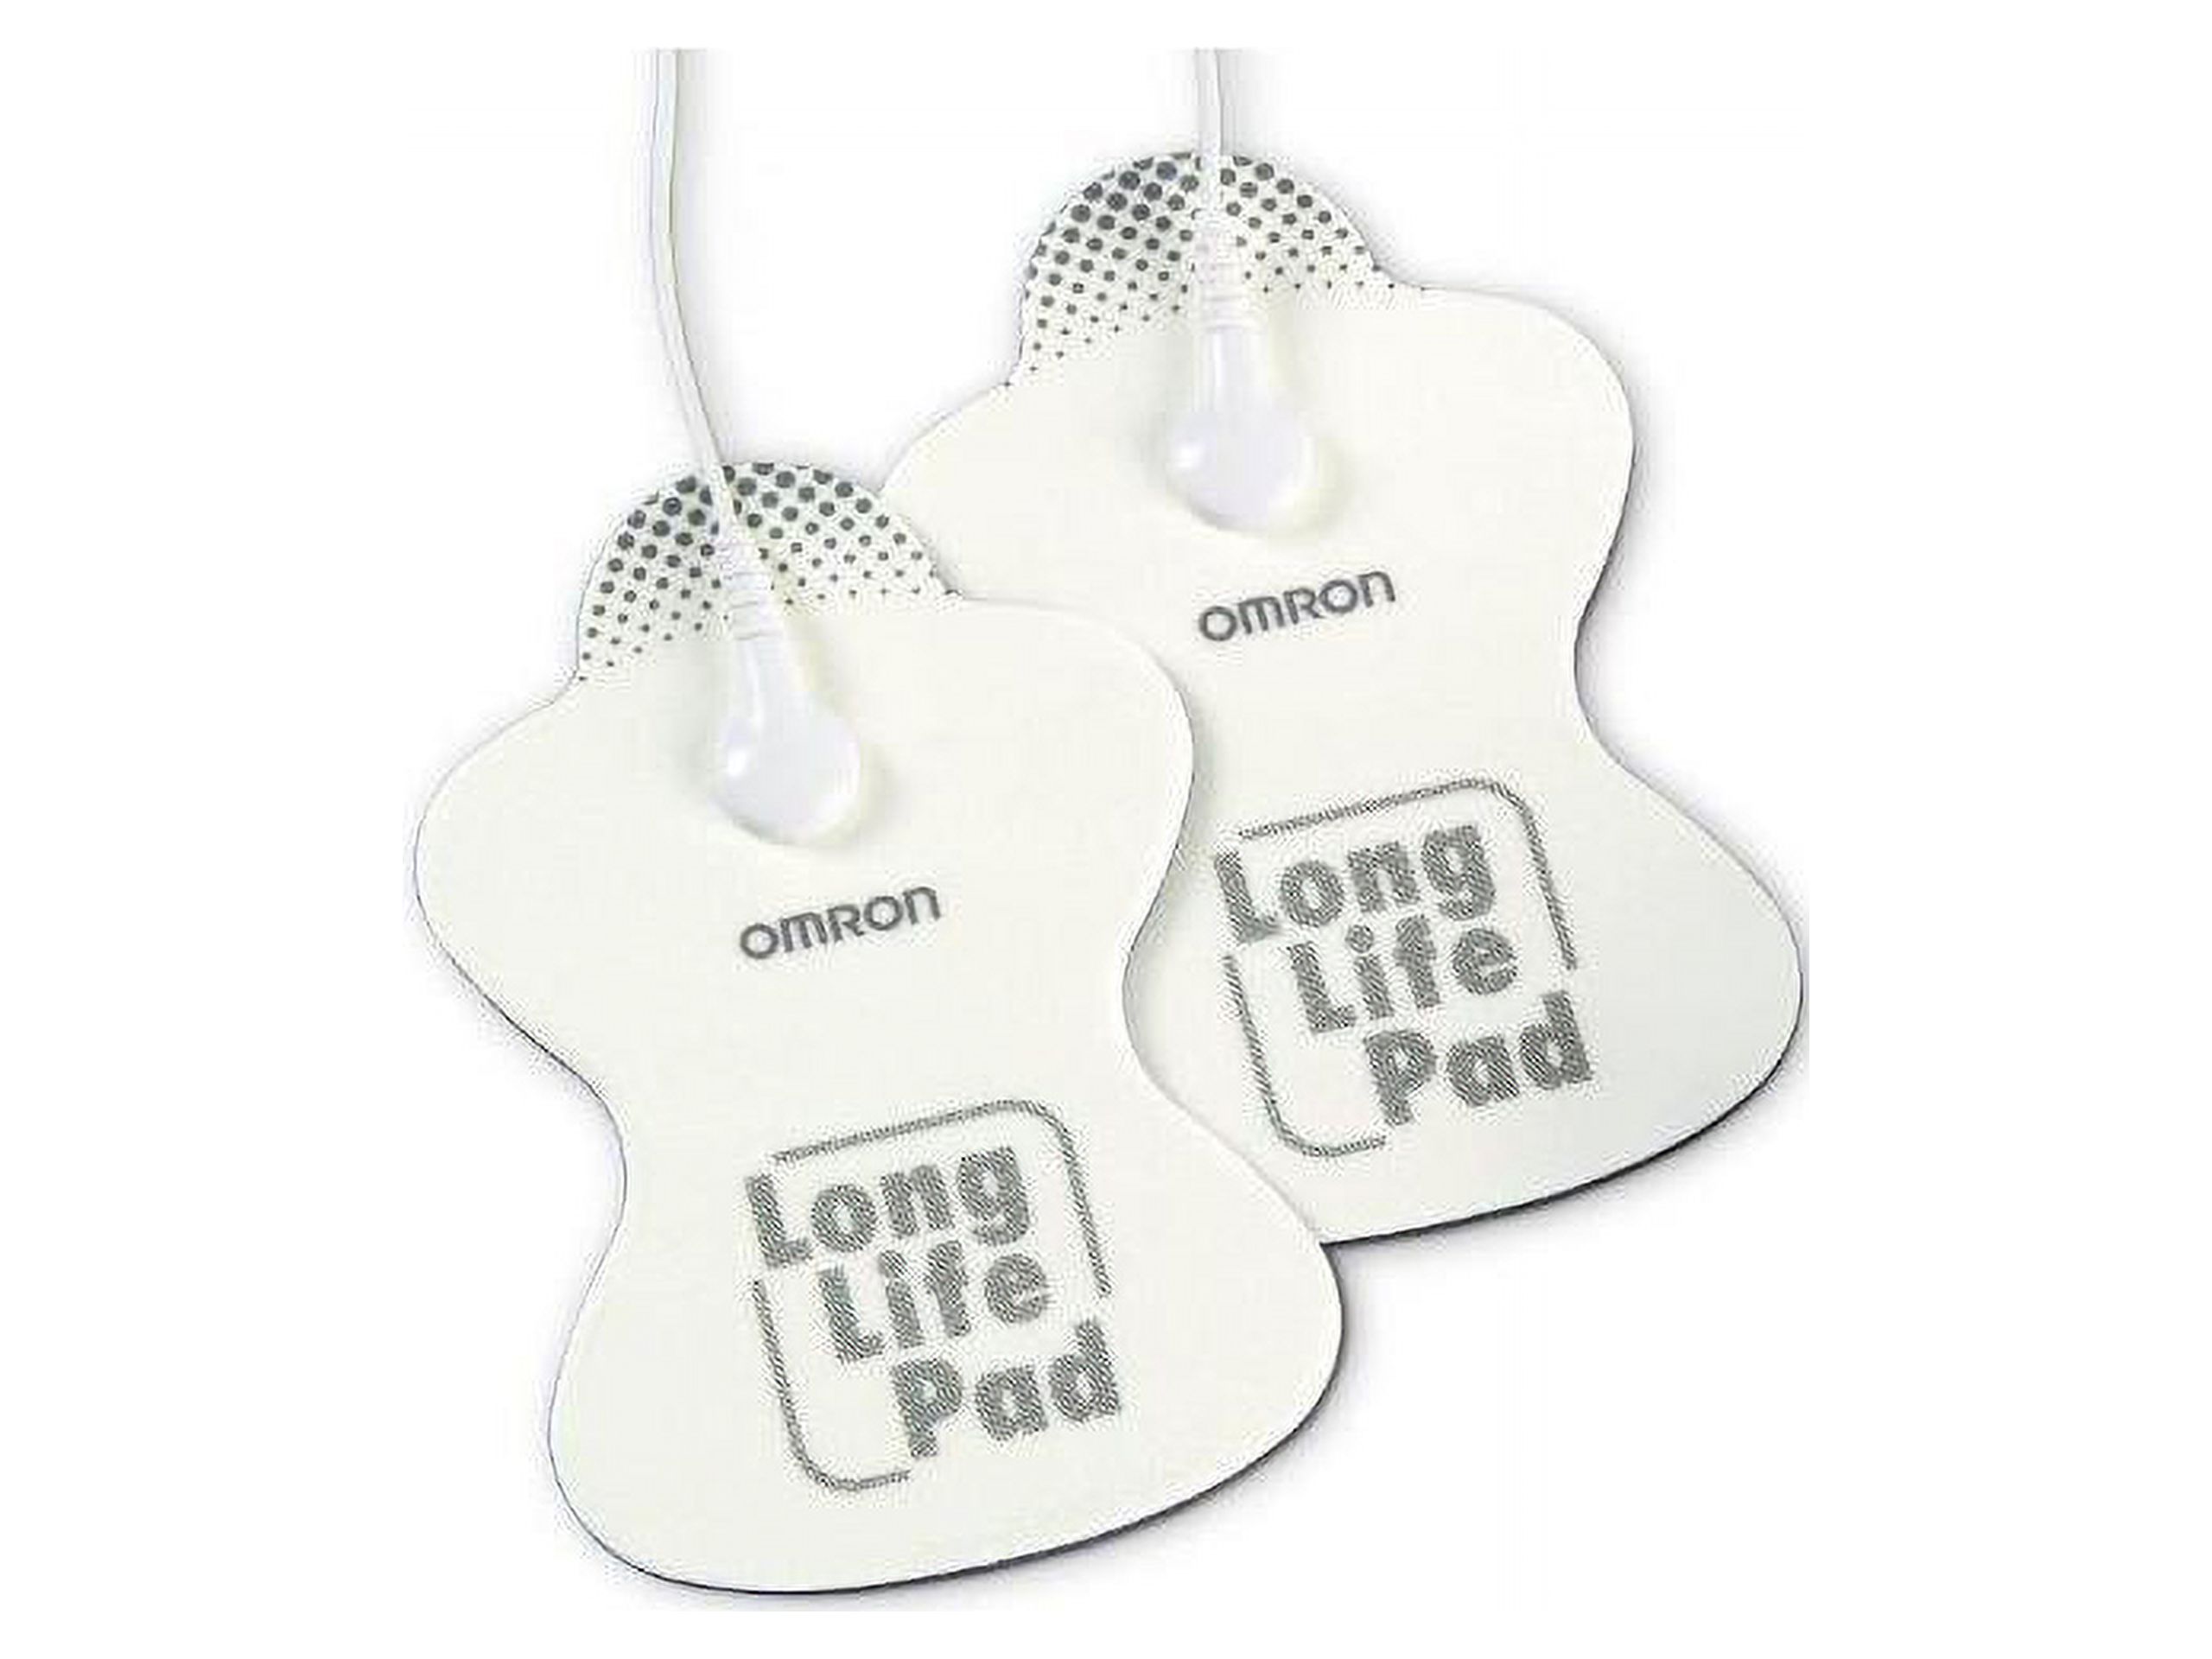 Omron Pmllpad Electrotherapy Long Life Pads - image 3 of 4